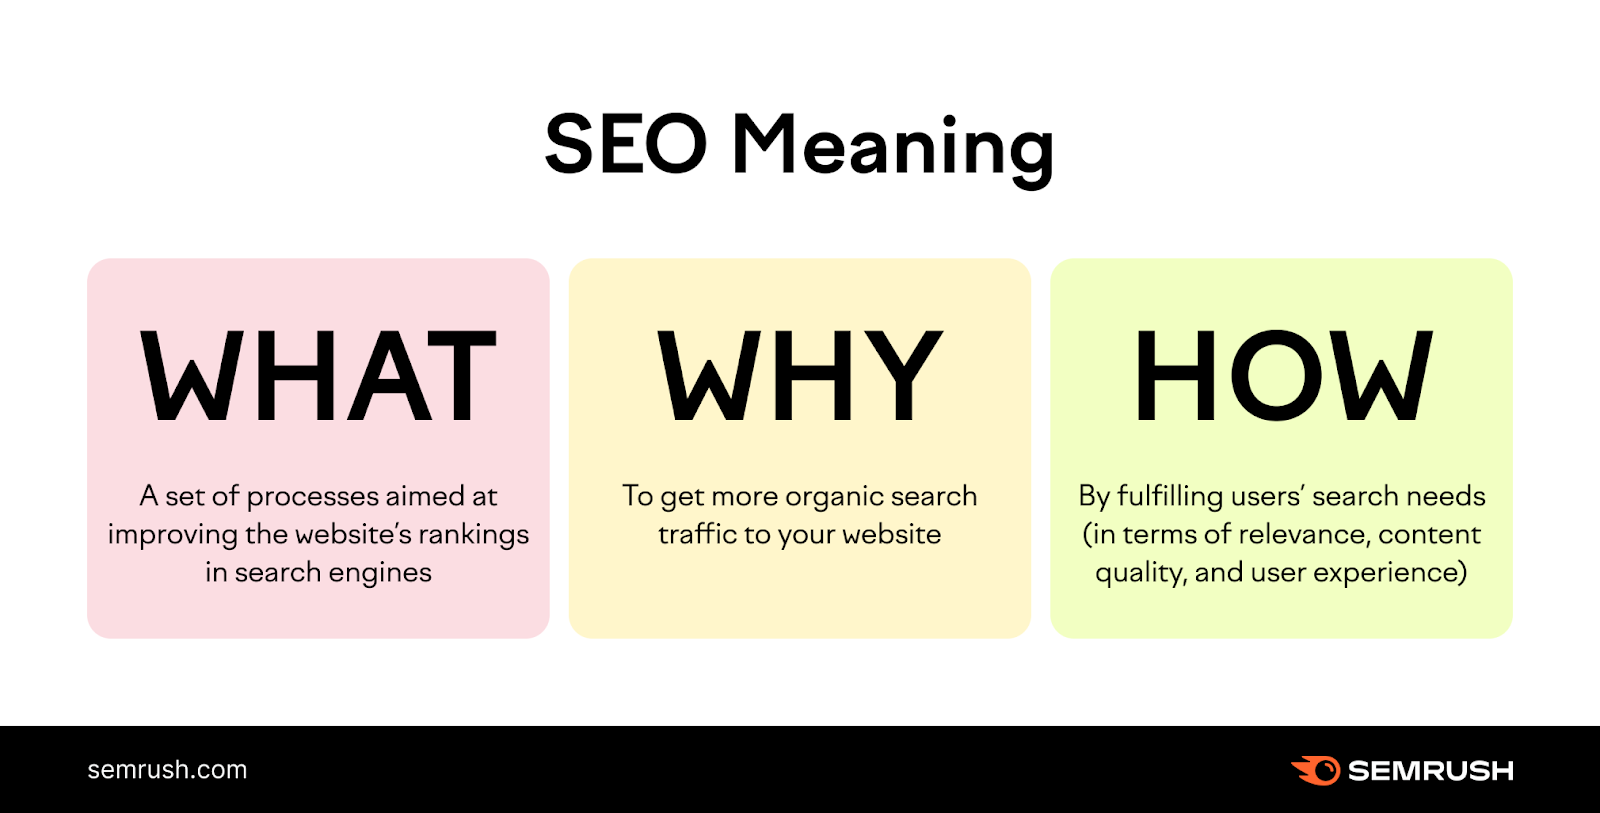 An image explaining the what, why and how of SEO